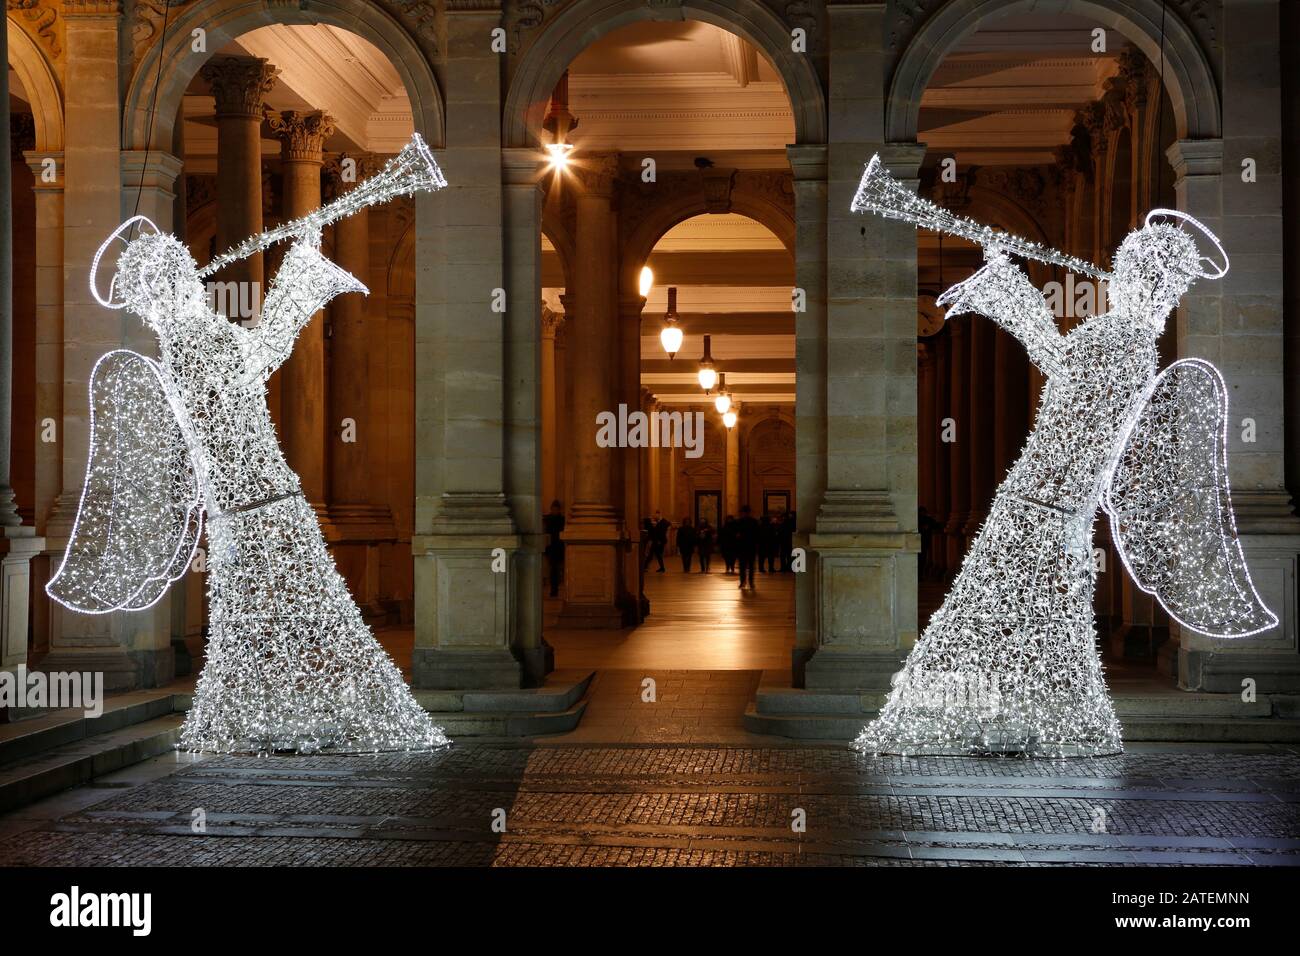 two light angels as decorations standing in front of the colonnade in Karlovy Vary at Christmas time Stock Photo